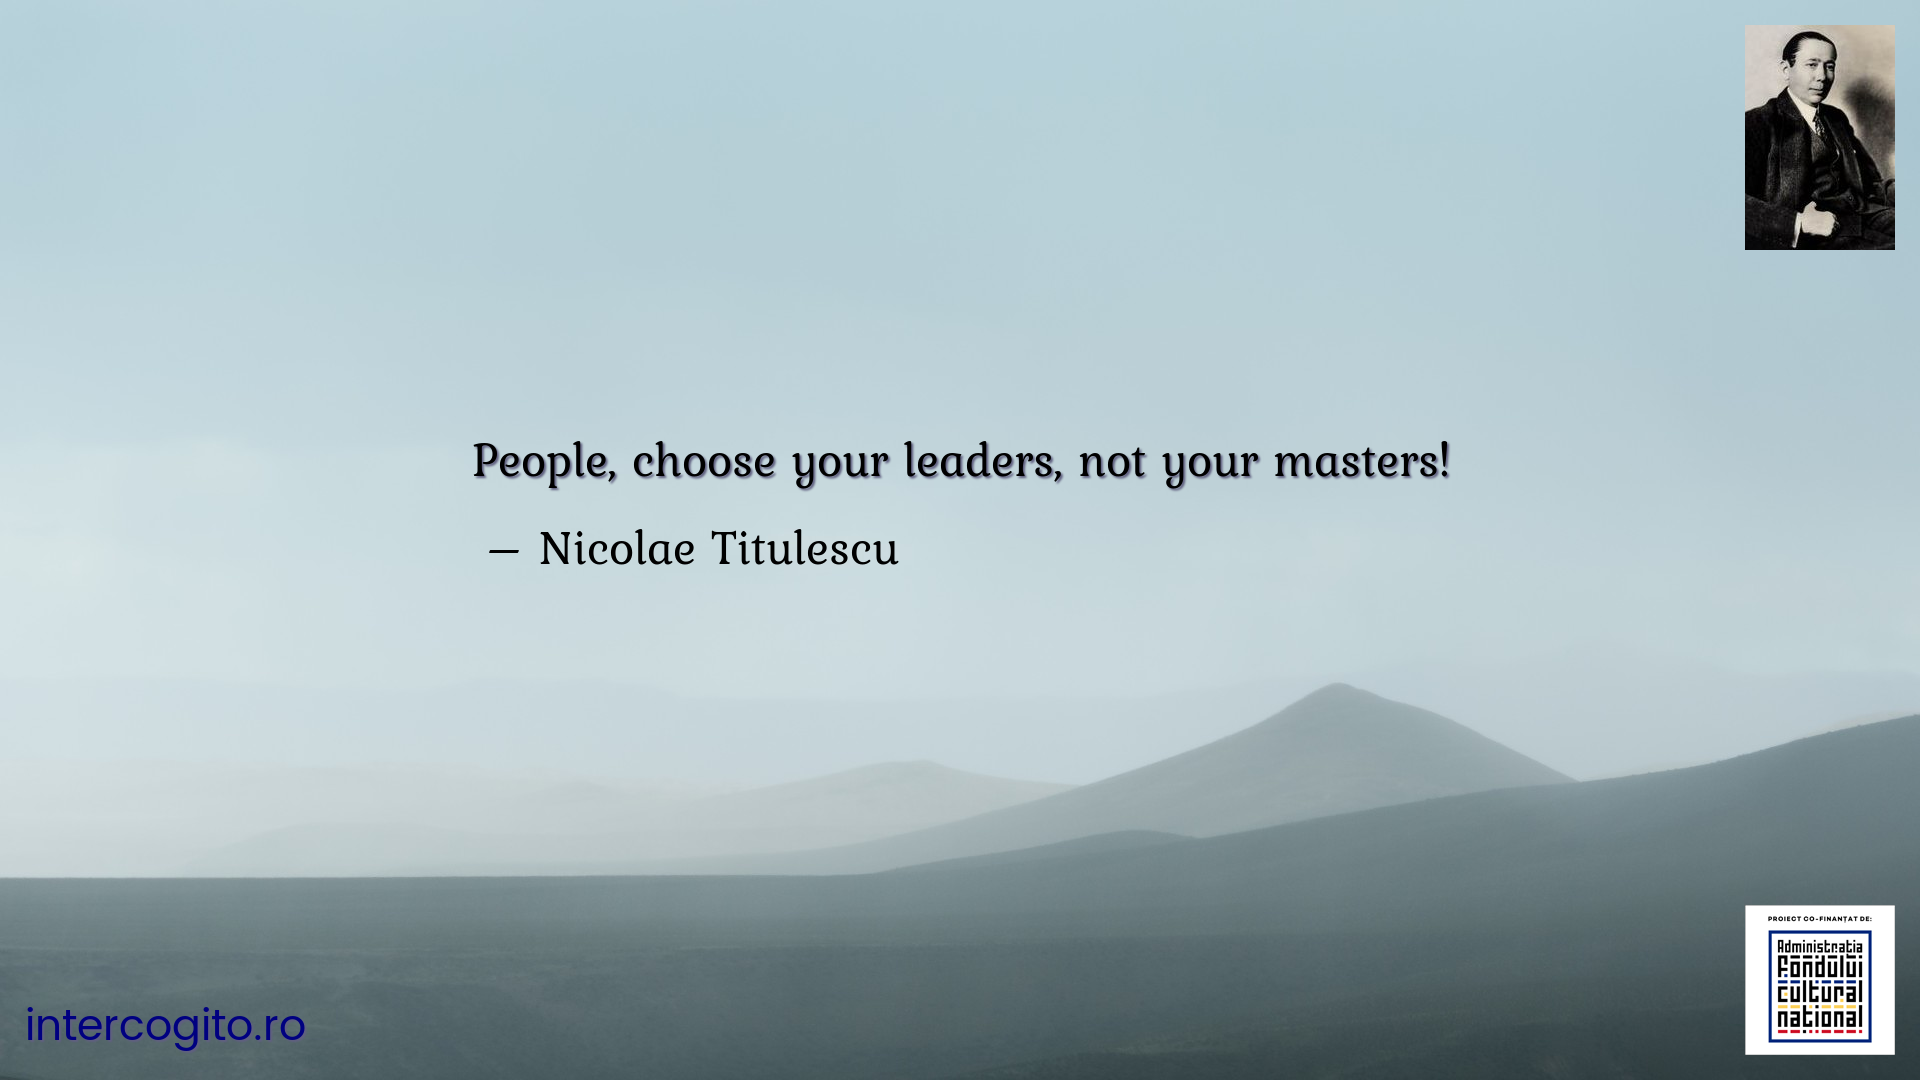 People, choose your leaders, not your masters!